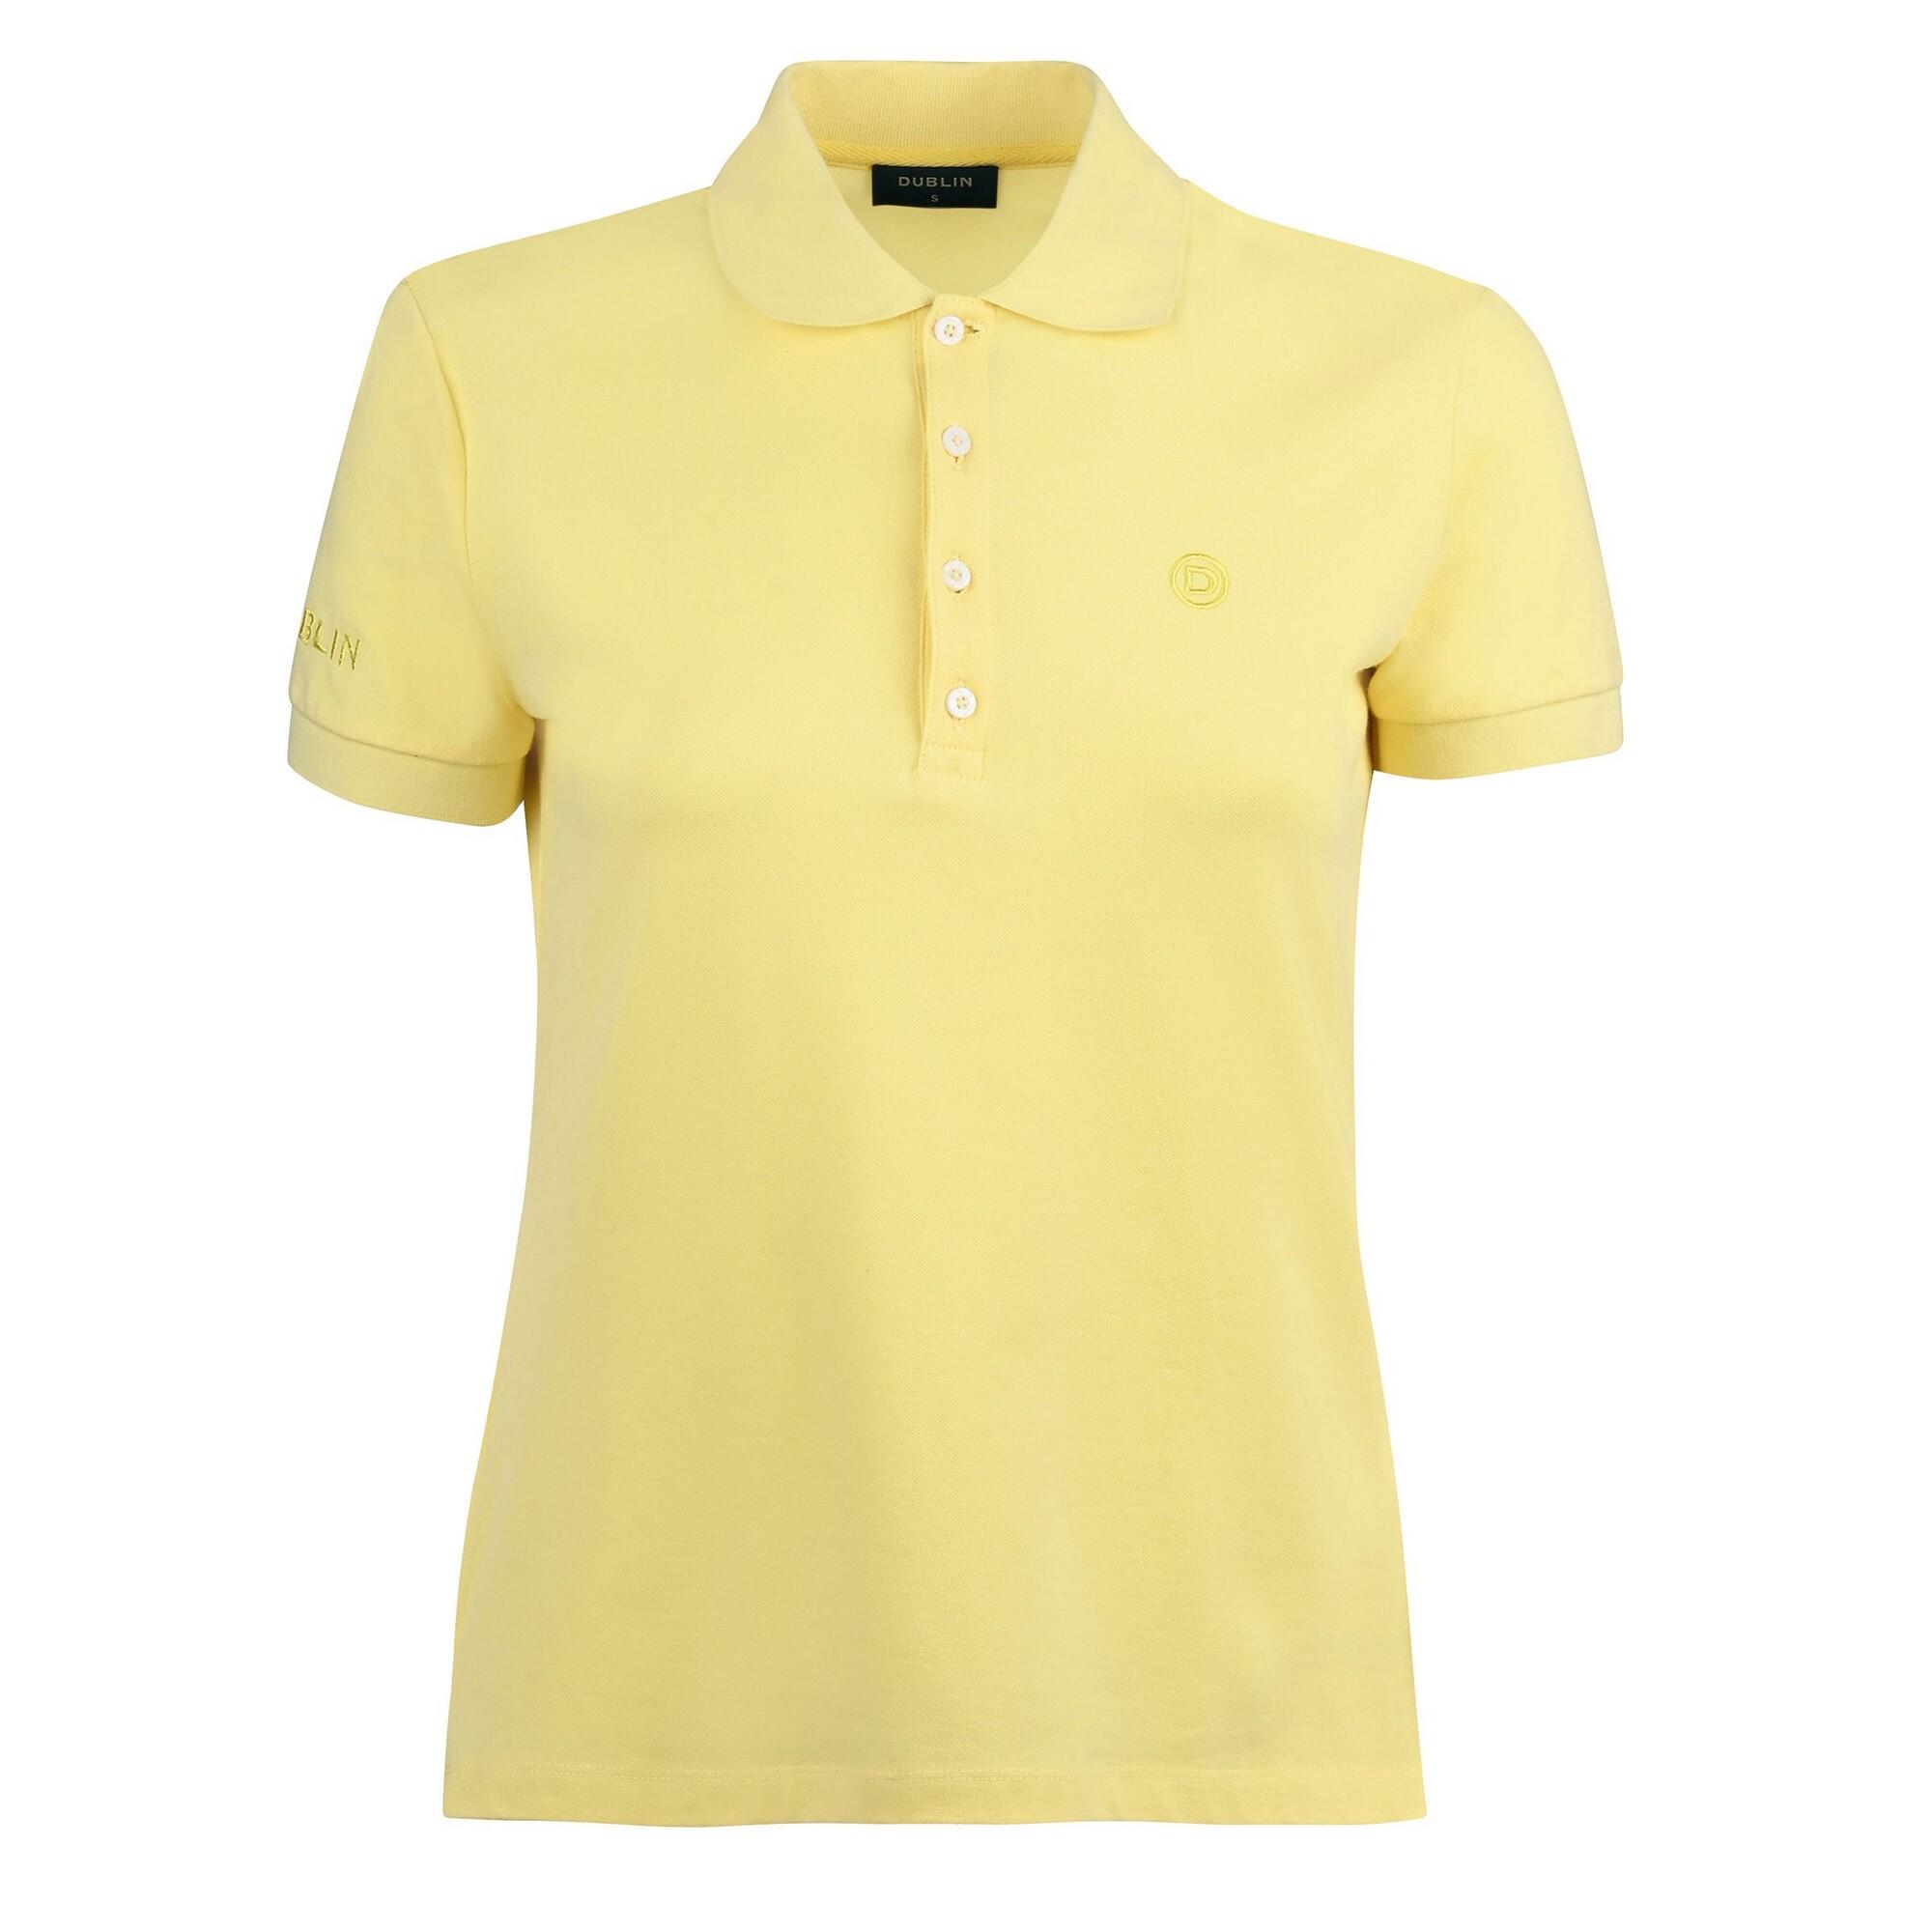 DUBLIN Womens/Ladies Lily Capped Sleeved Polo Shirt (Butter)